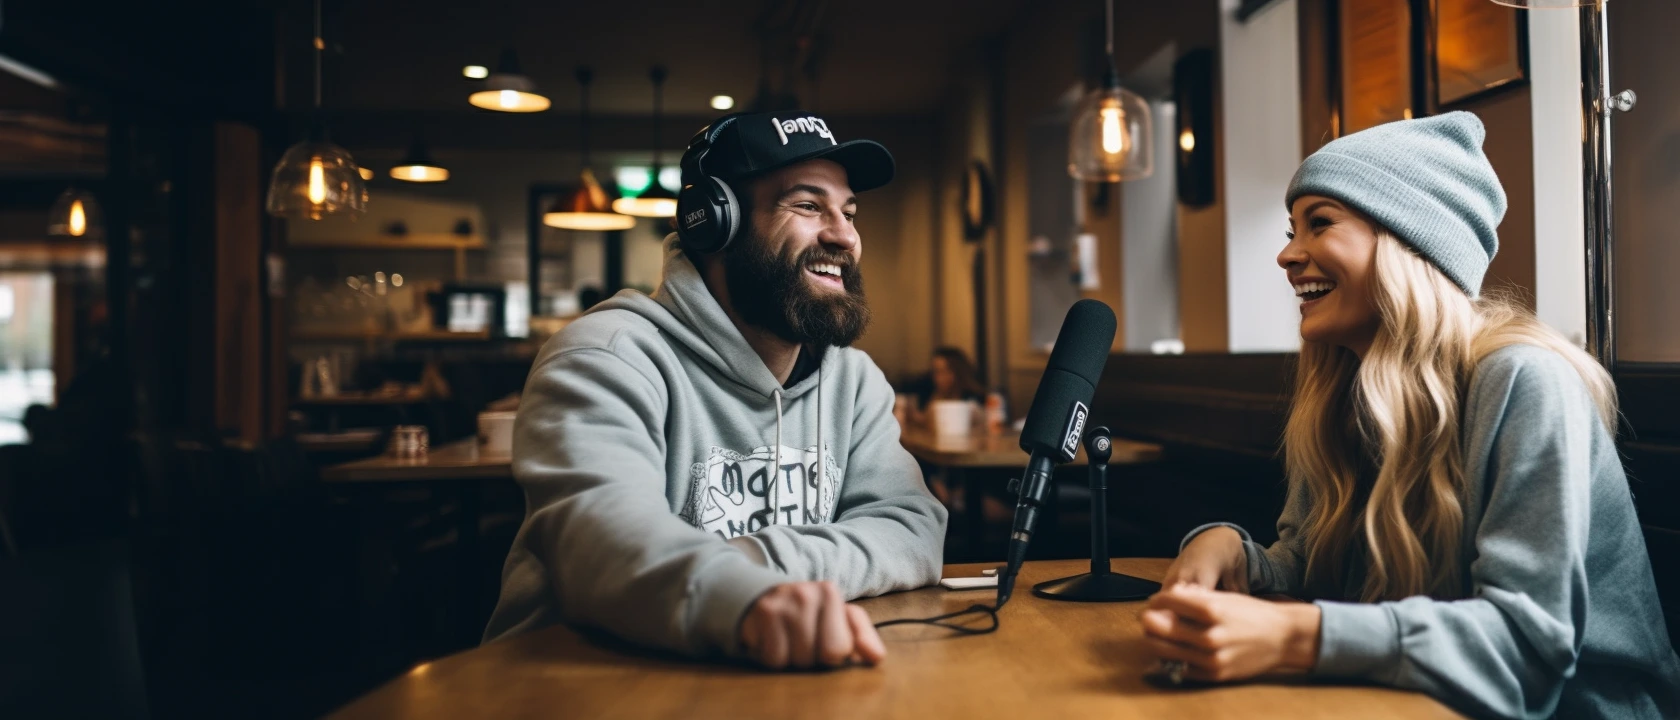 A woman and a man recording a podcast in a noisy cafe